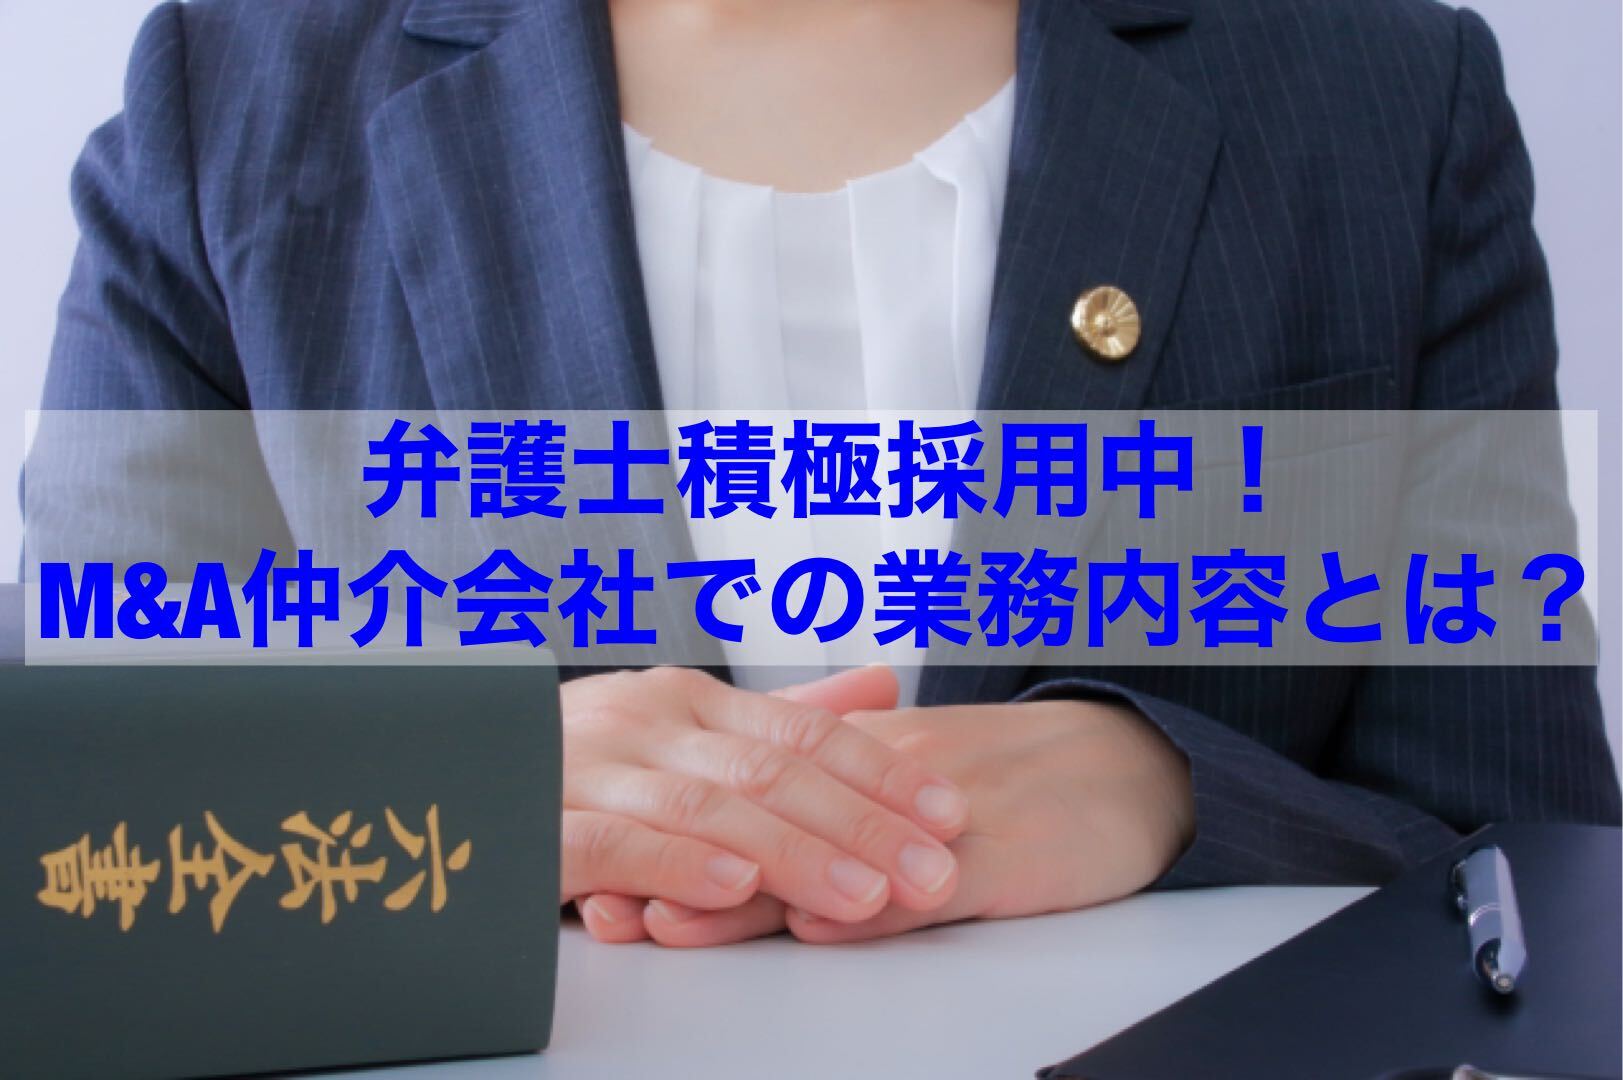 You are currently viewing 【転職情報】弁護士積極採用中！M＆A仲介会社での業務内容とは？